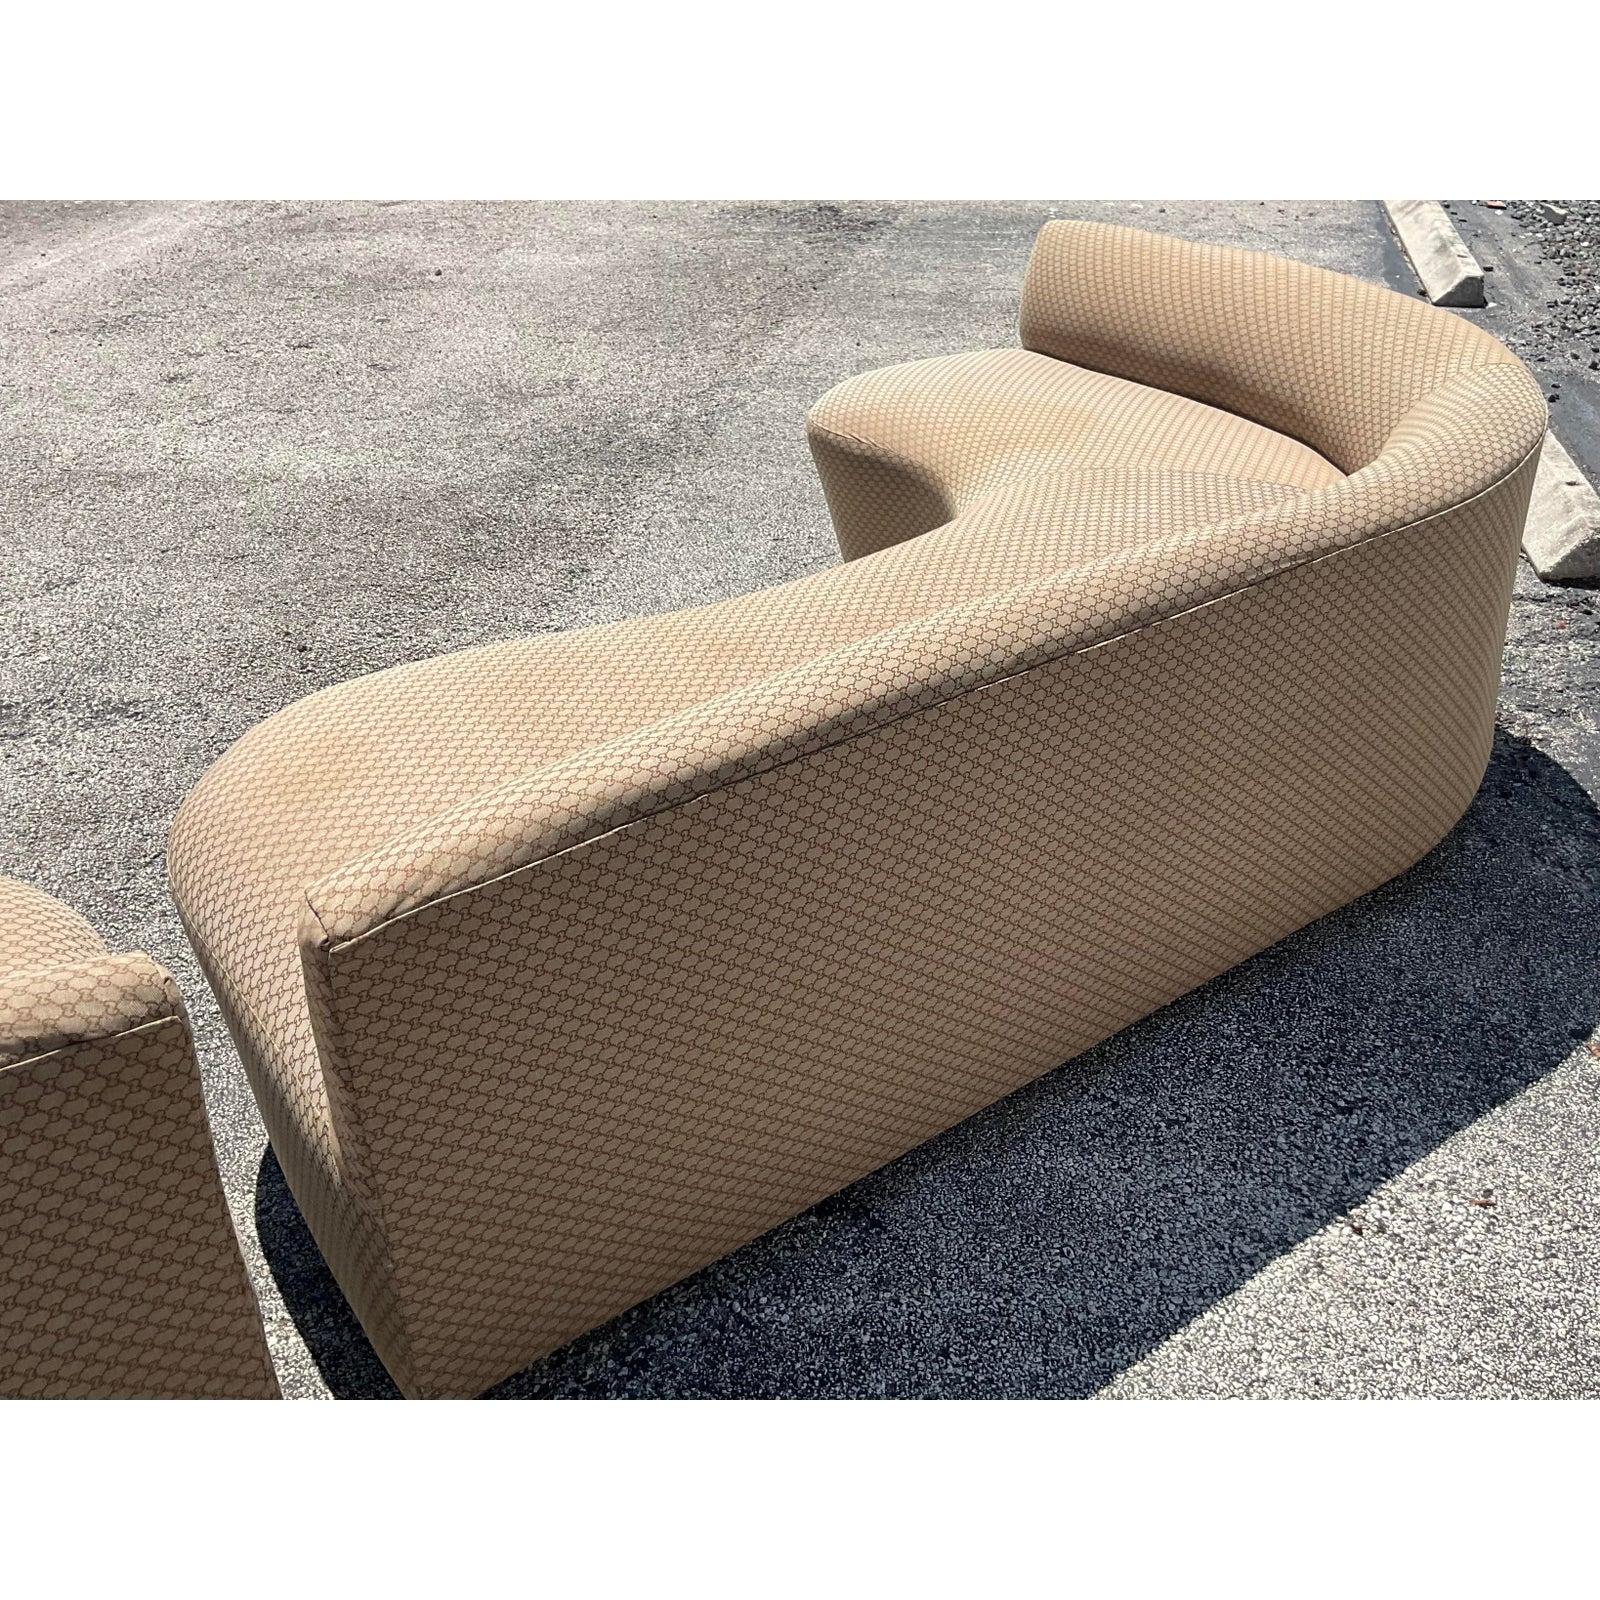 An exceptional pair of vintage Boho sofa. Custom built in a chic biomorphic shape. Great together but also work beautifully apart. Covered in a logo jacquard. The sofas come from a mansion owned by a big celebrity that was sold to an even bigger